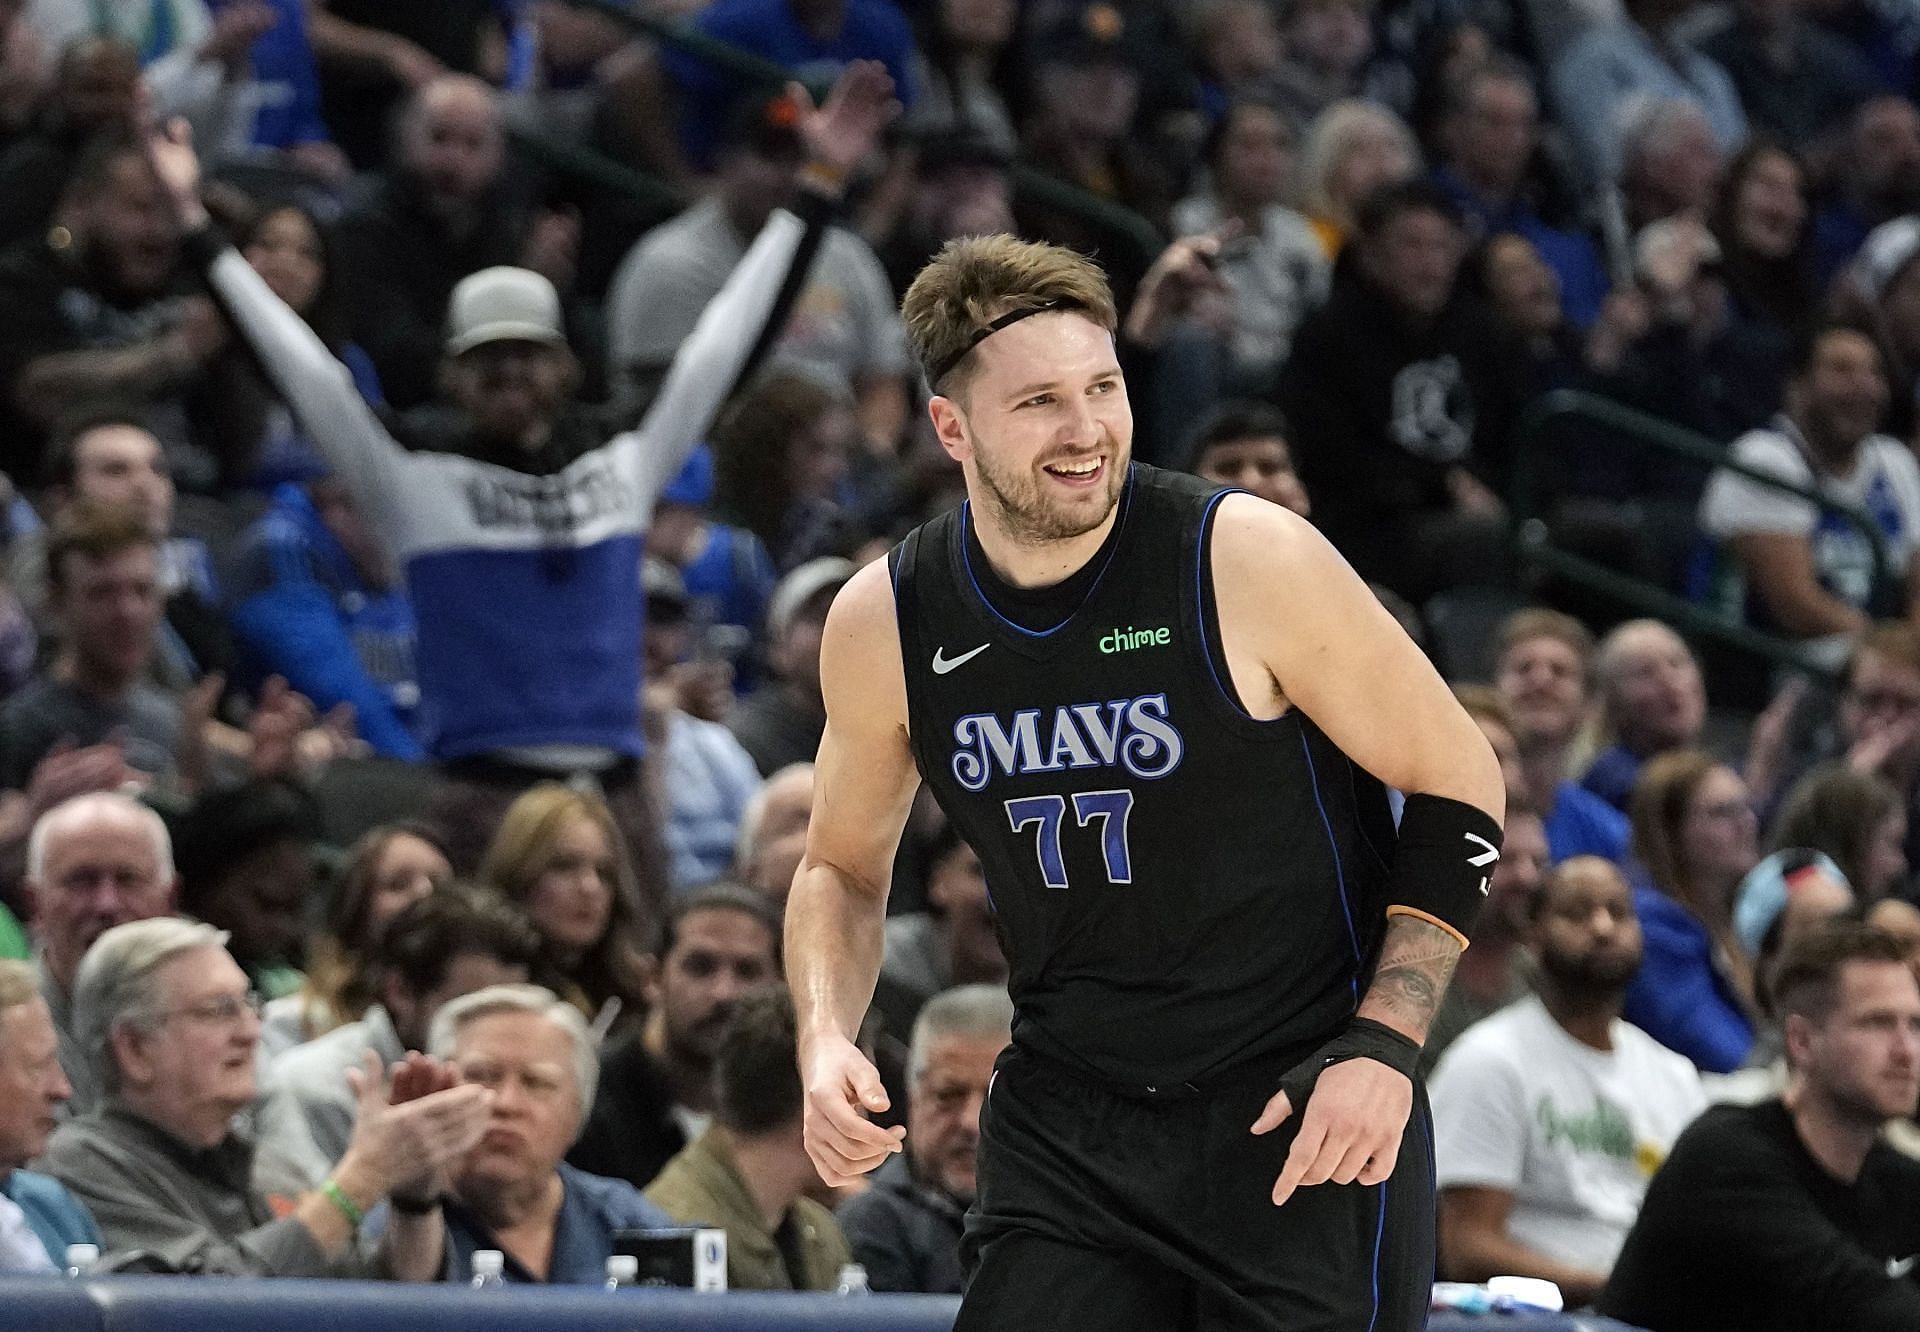 Luka Doncic just dropped a record 25-point triple-double against the Utah Jazz on Wednesday.